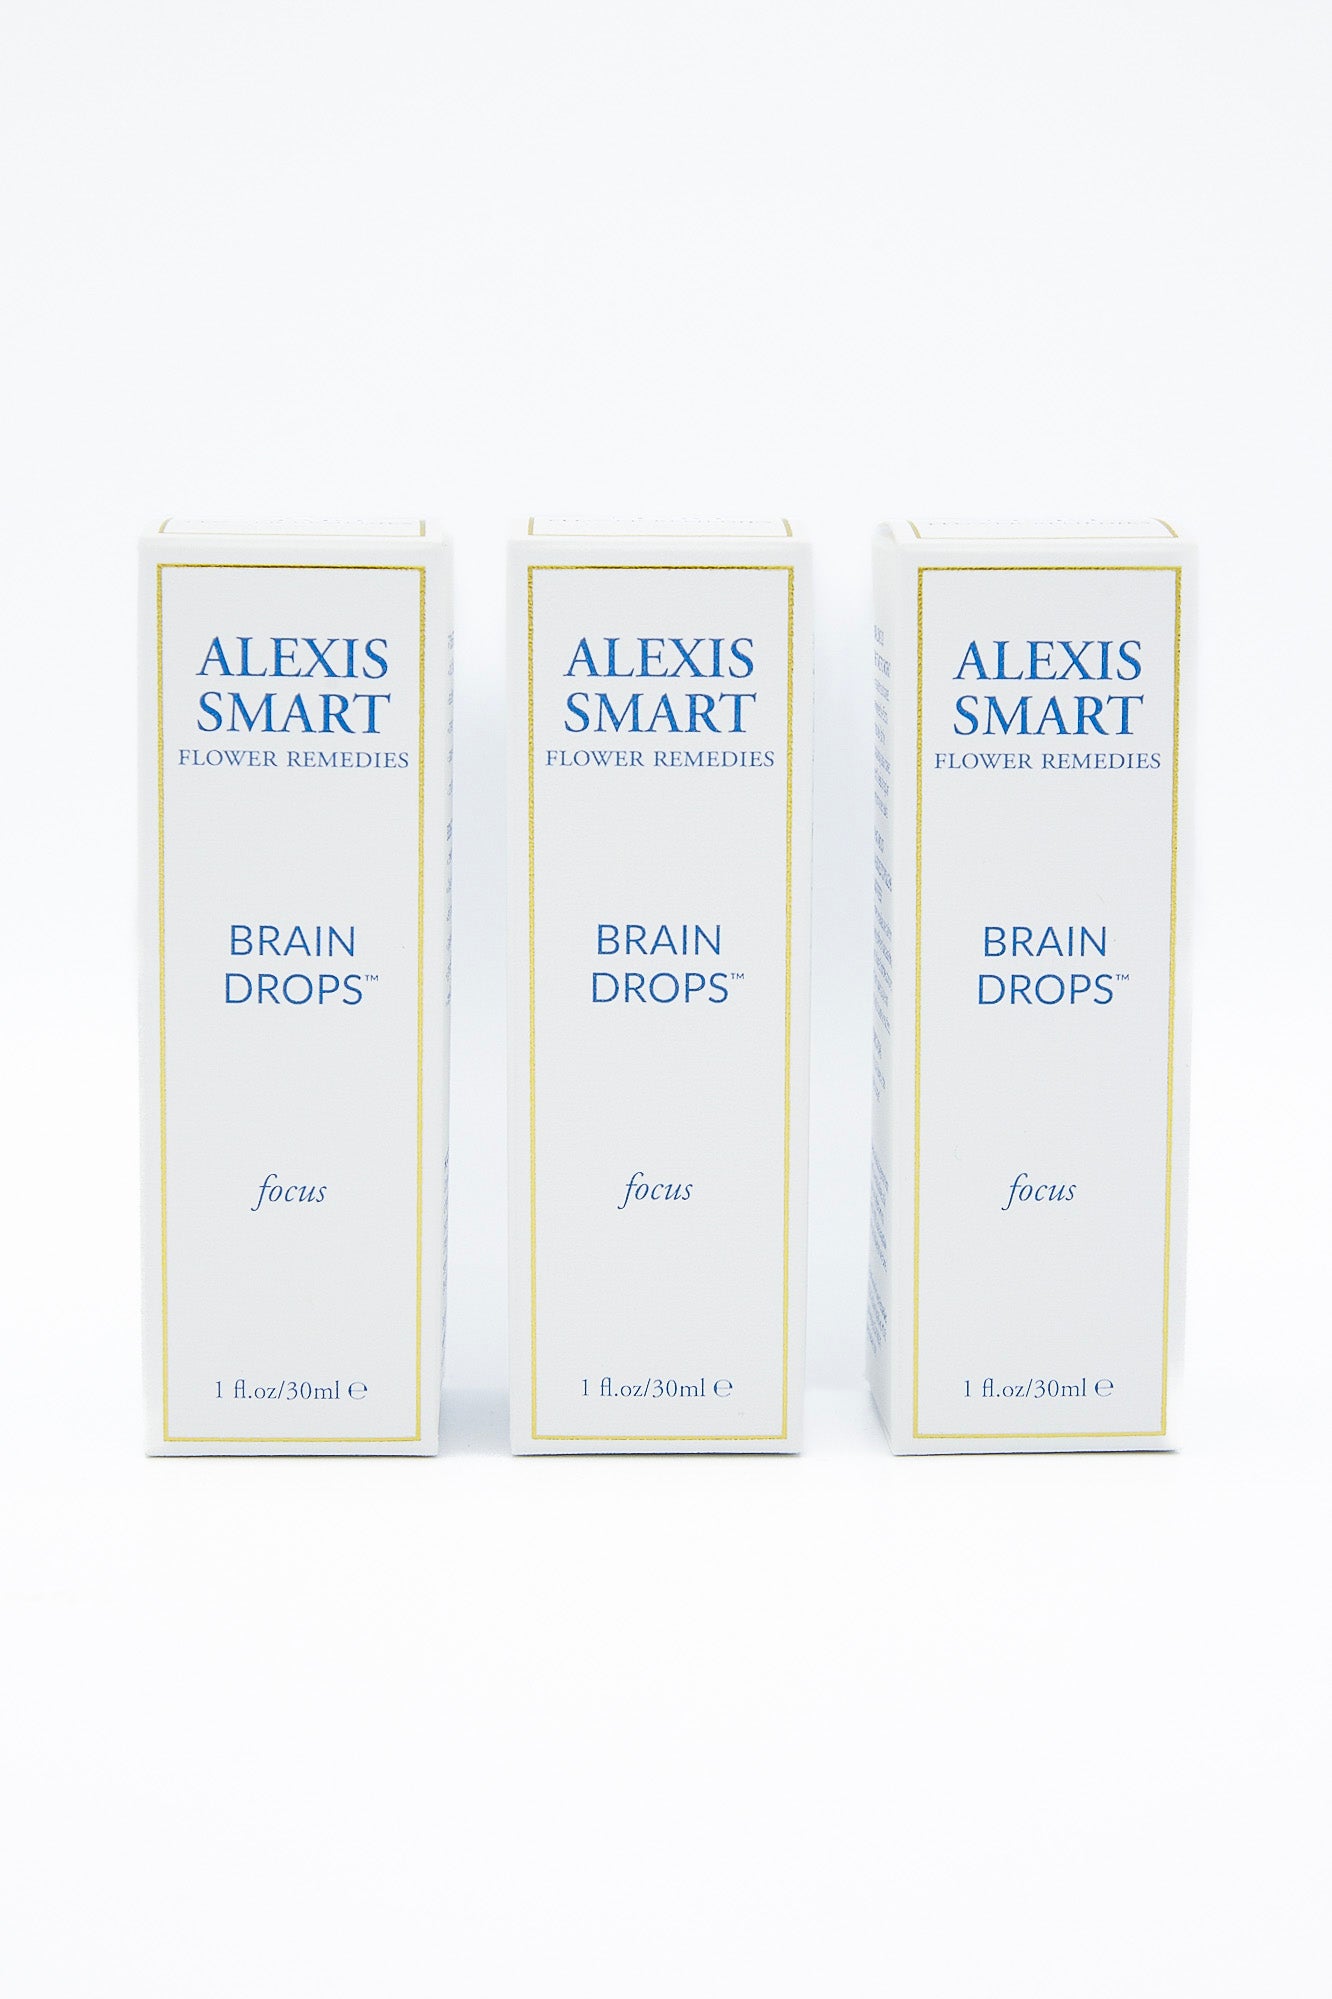 Three boxes of Alexis Smart Flower Remedies - Brain Drops designed to enhance attention and focus, and improve memory, placed on a white background.